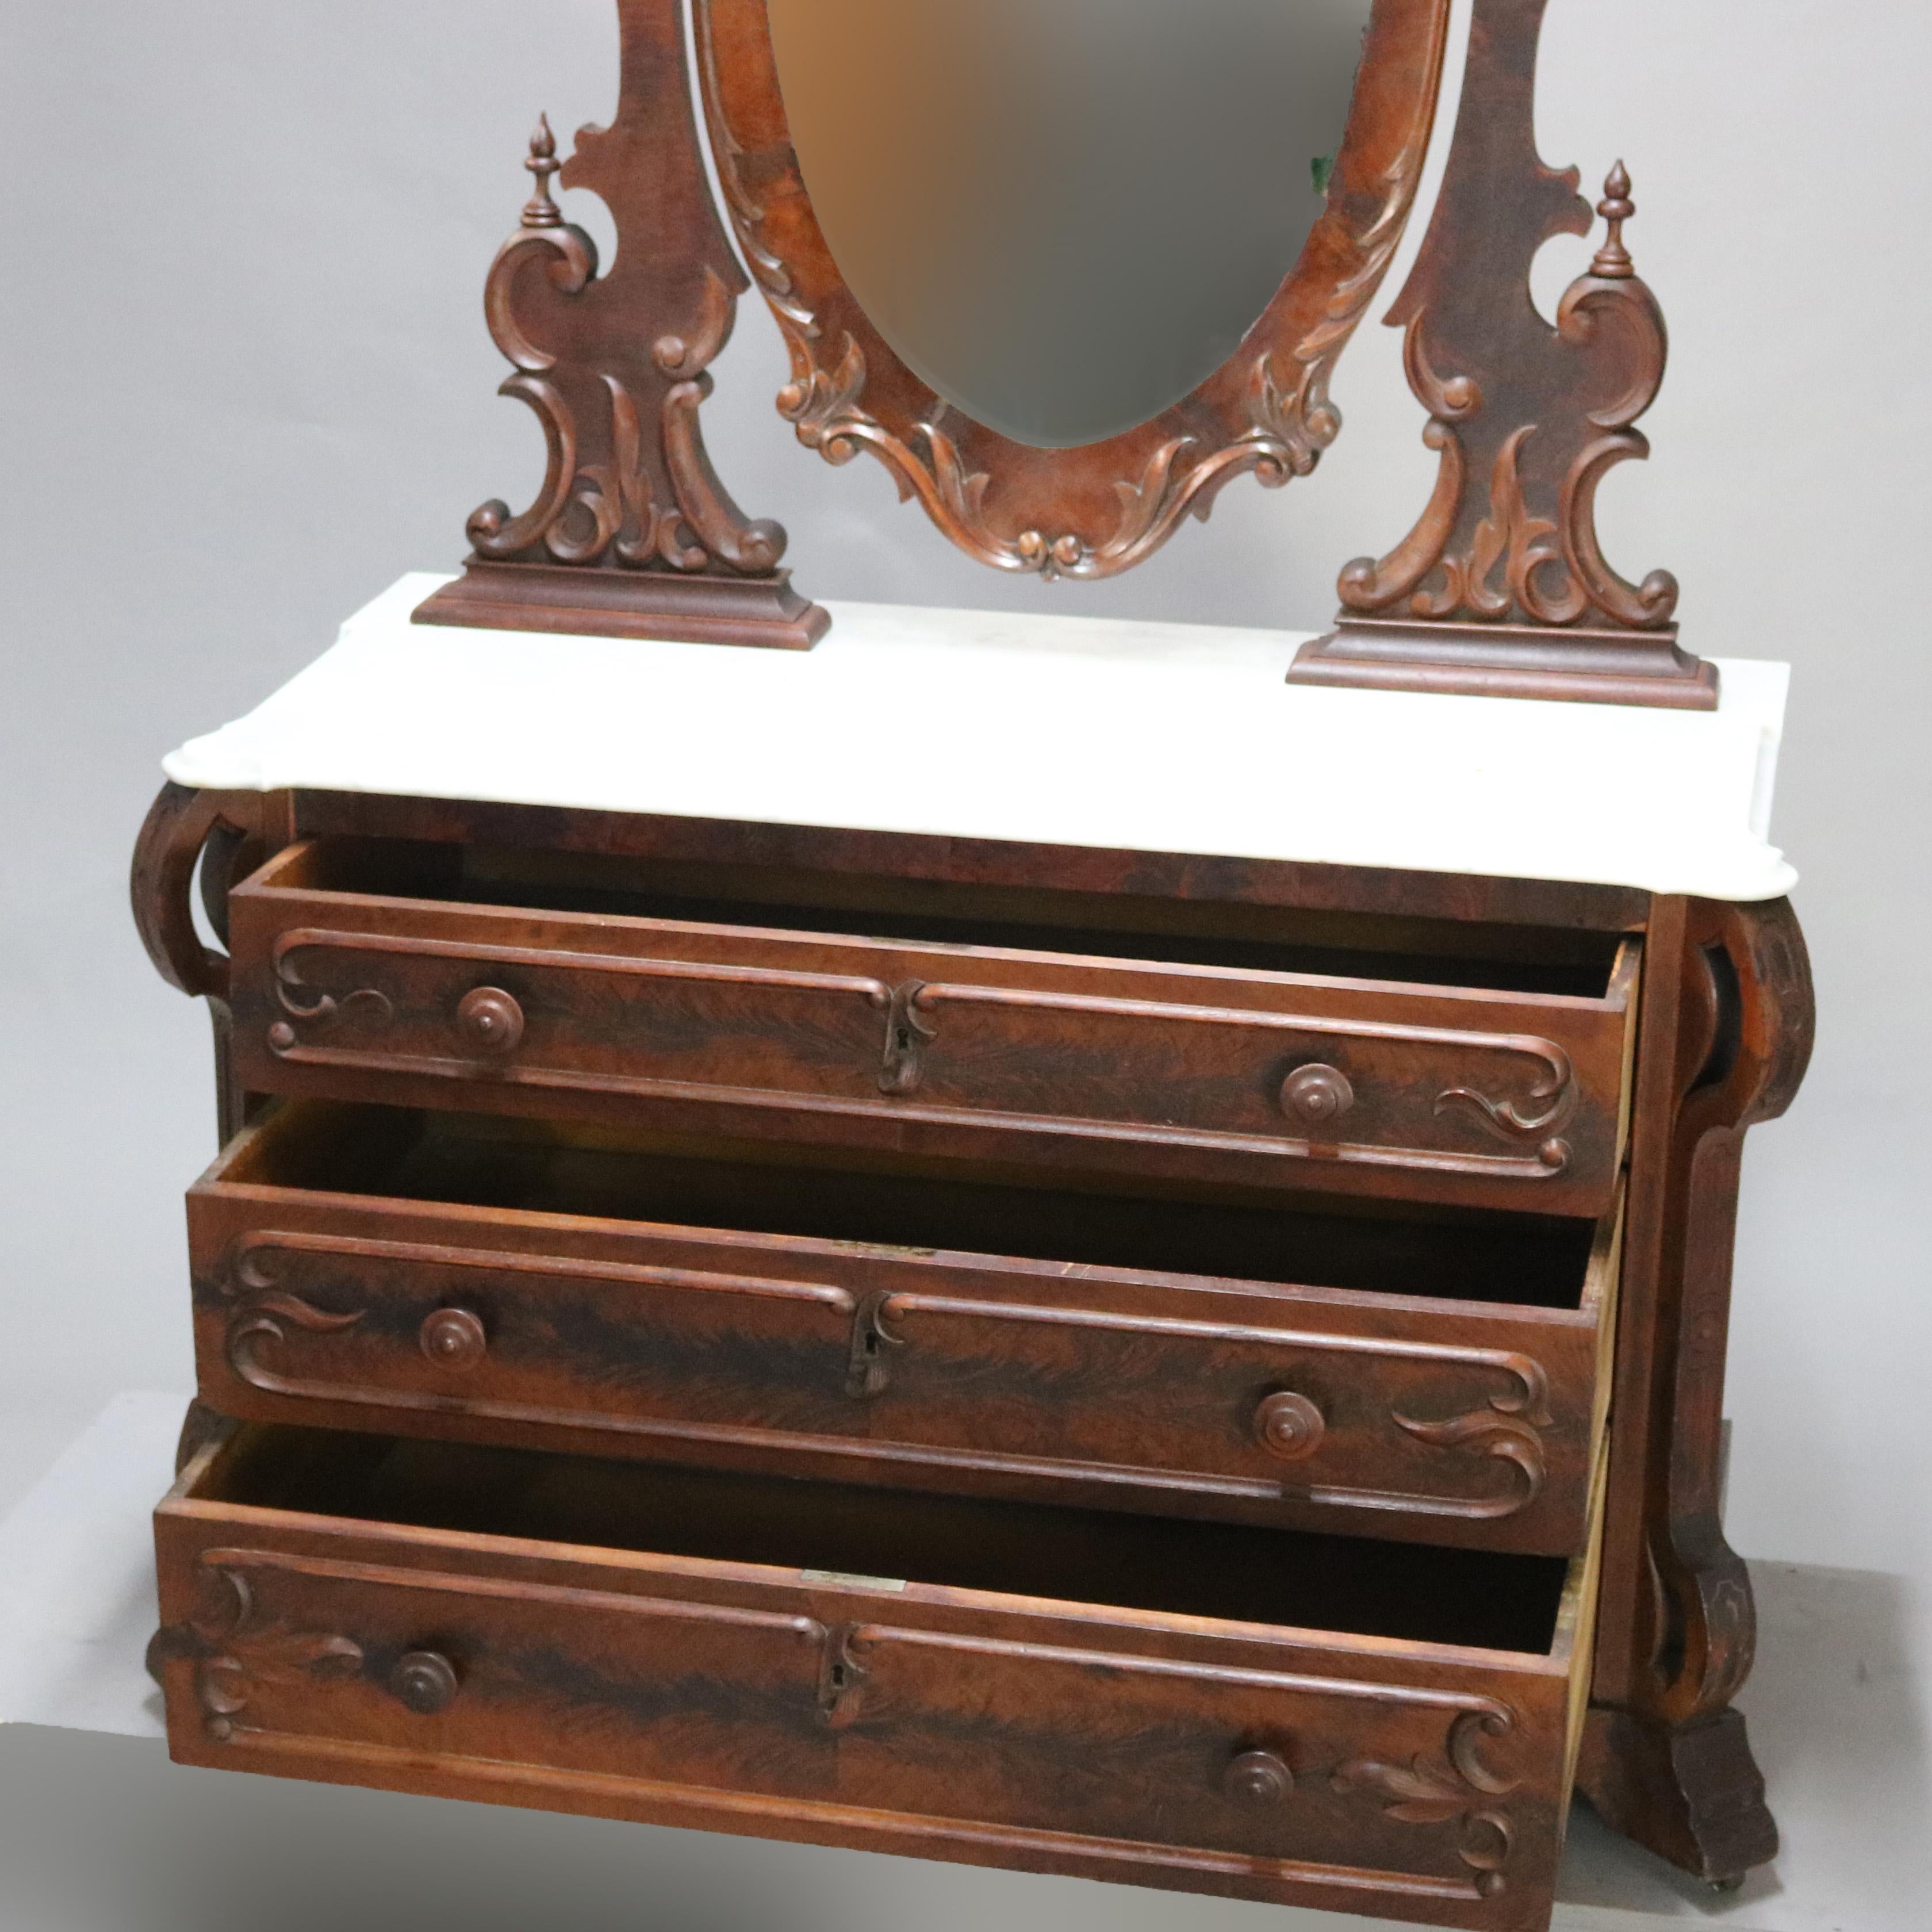 Antique Renaissance Revival Flame Mahogany and Marble Dresser, circa 1880 For Sale 7